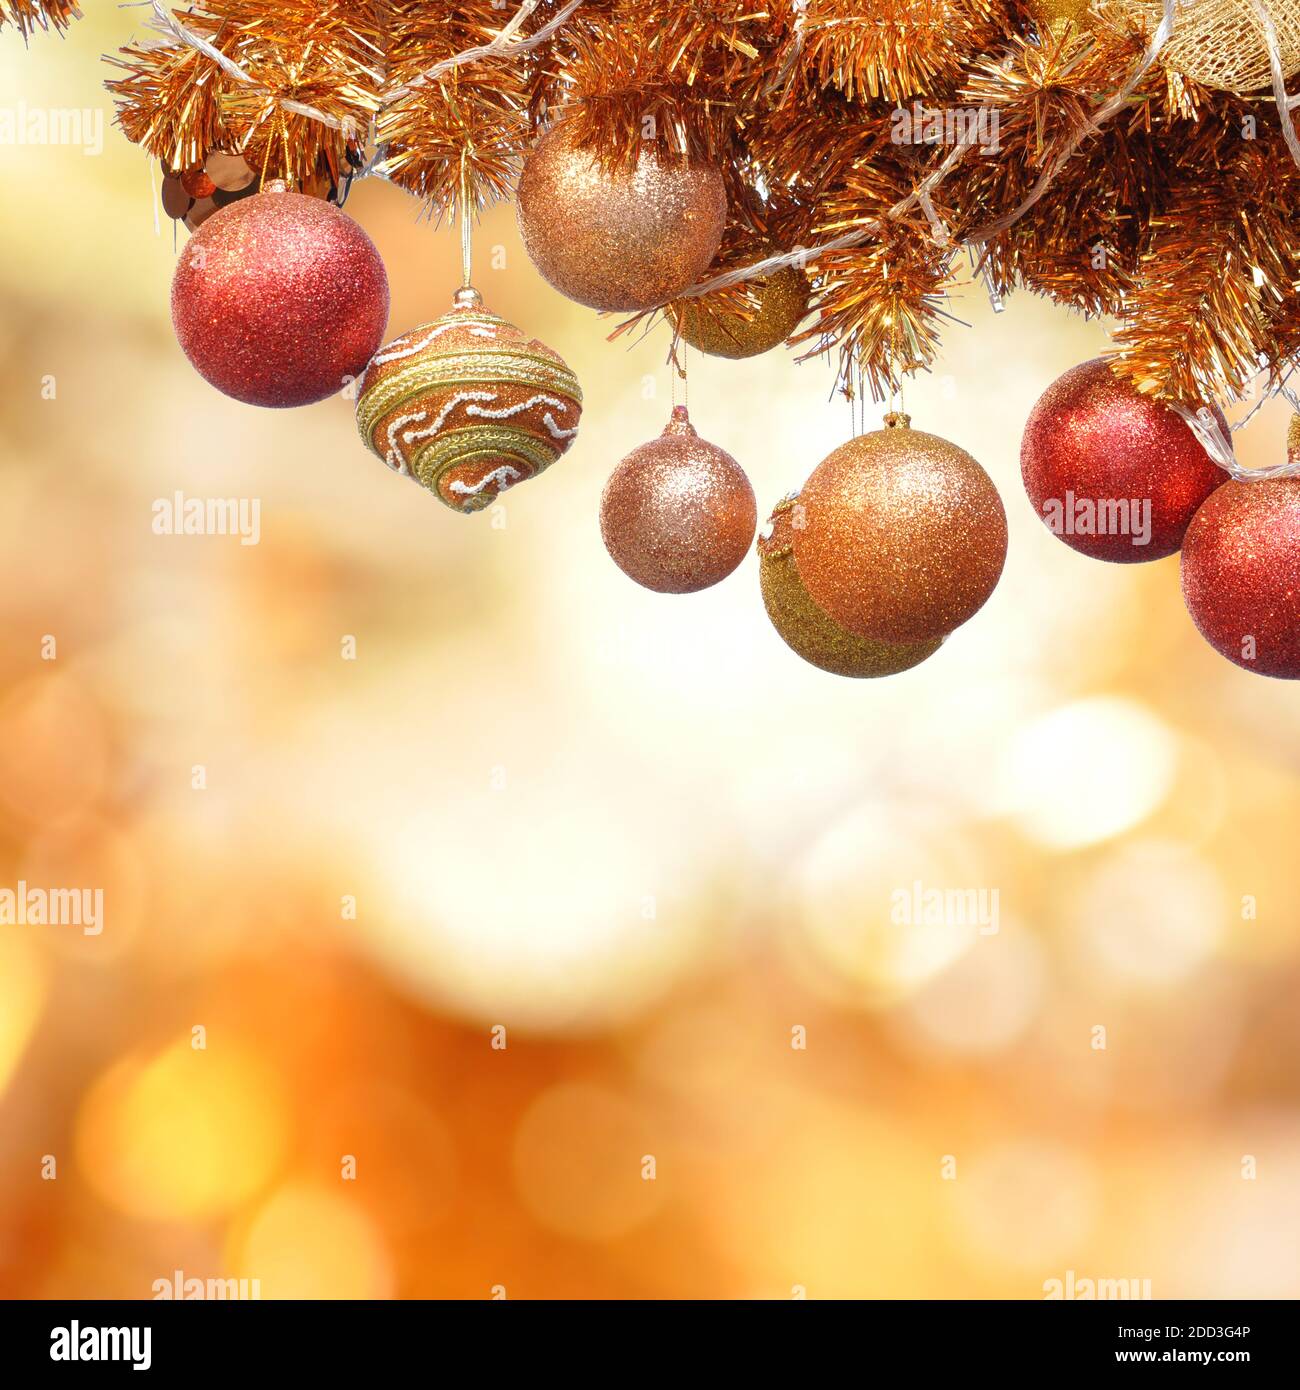 Christmas ornaments on lens flare background Stock Photo